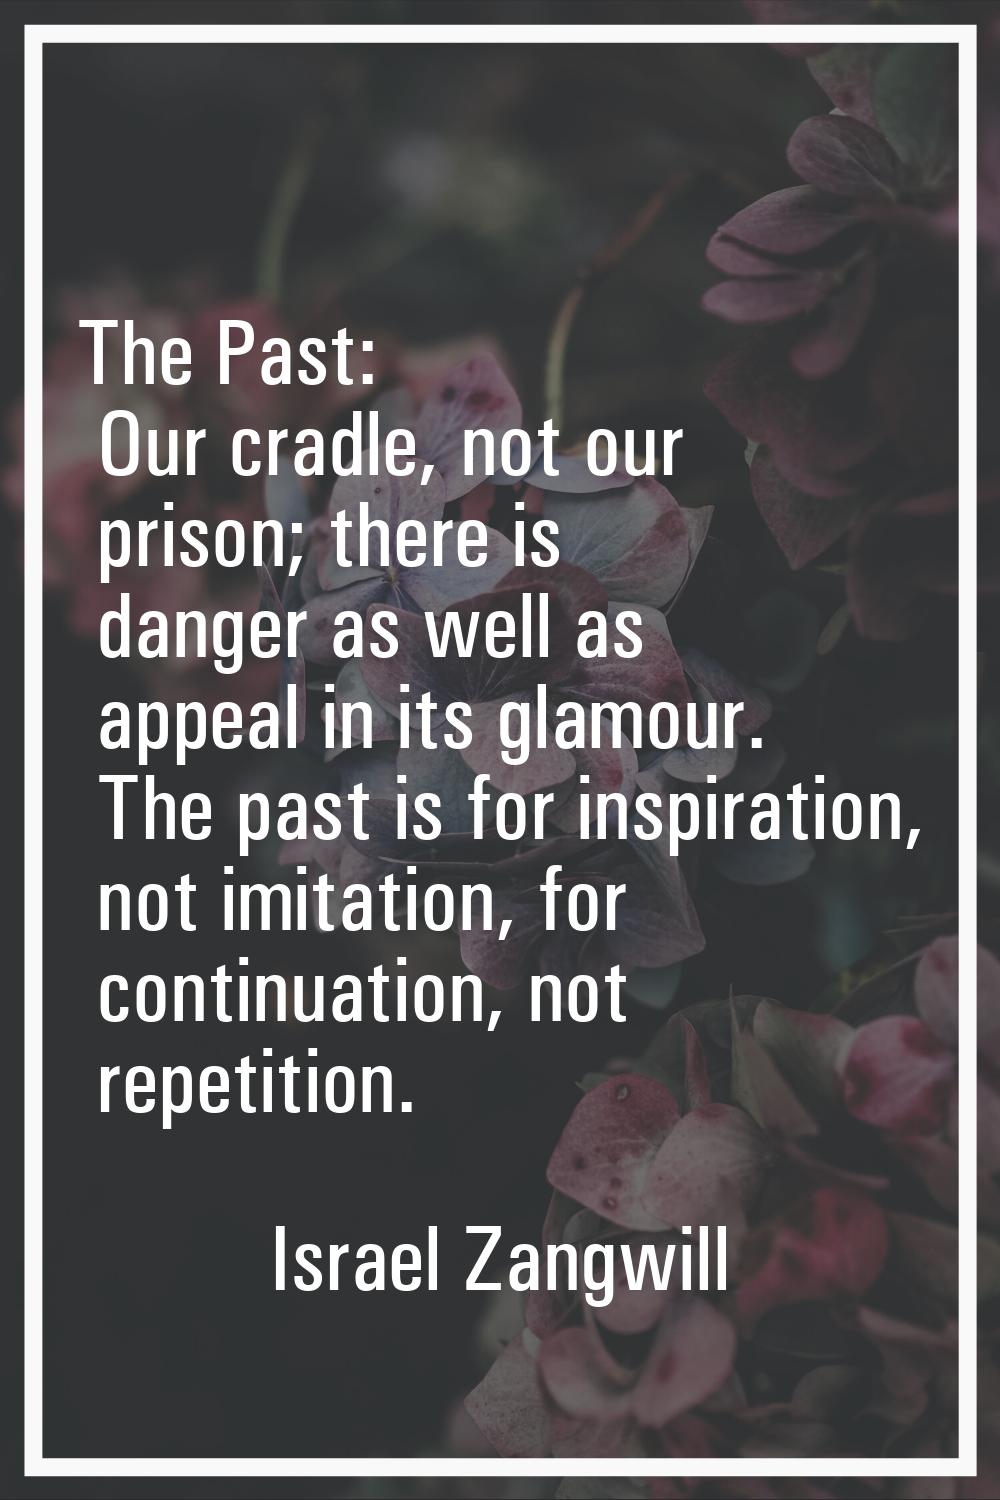 The Past: Our cradle, not our prison; there is danger as well as appeal in its glamour. The past is